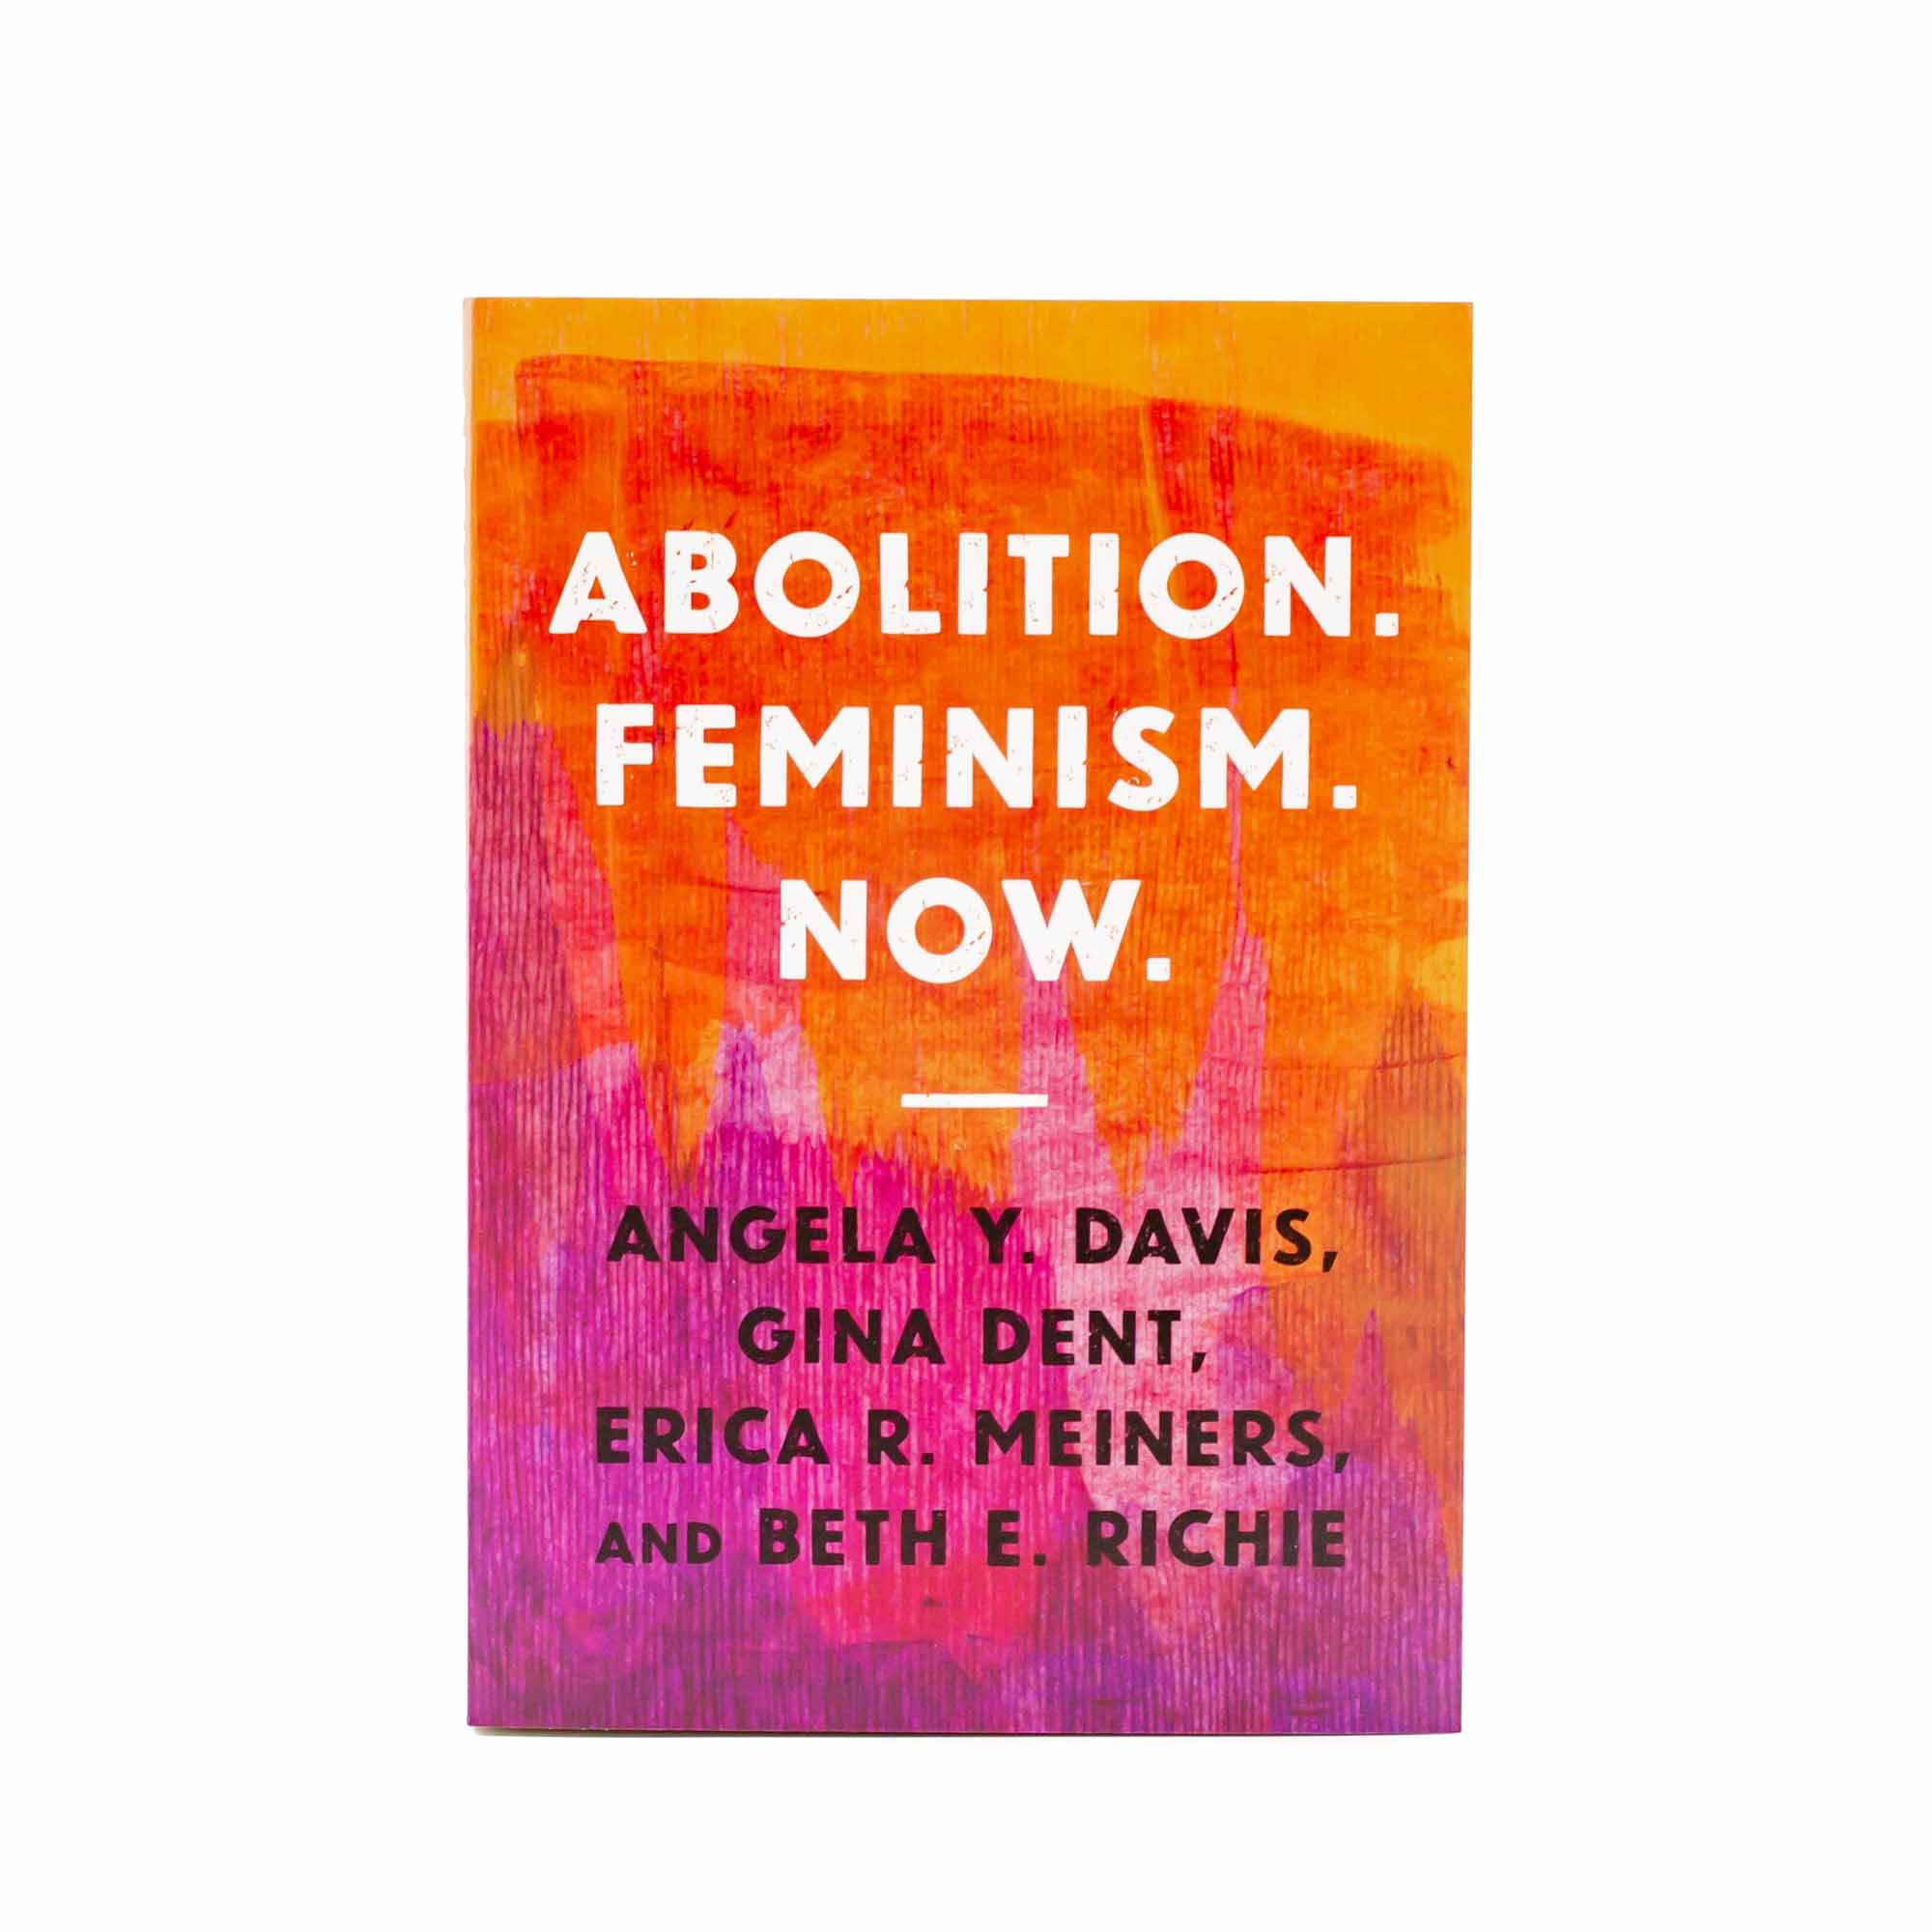 Abolition. Feminism. Now. by Angela Y. Davis, Gina Dent, Erica R. Meiners, and Beth E. Richie - Mortise And Tenon